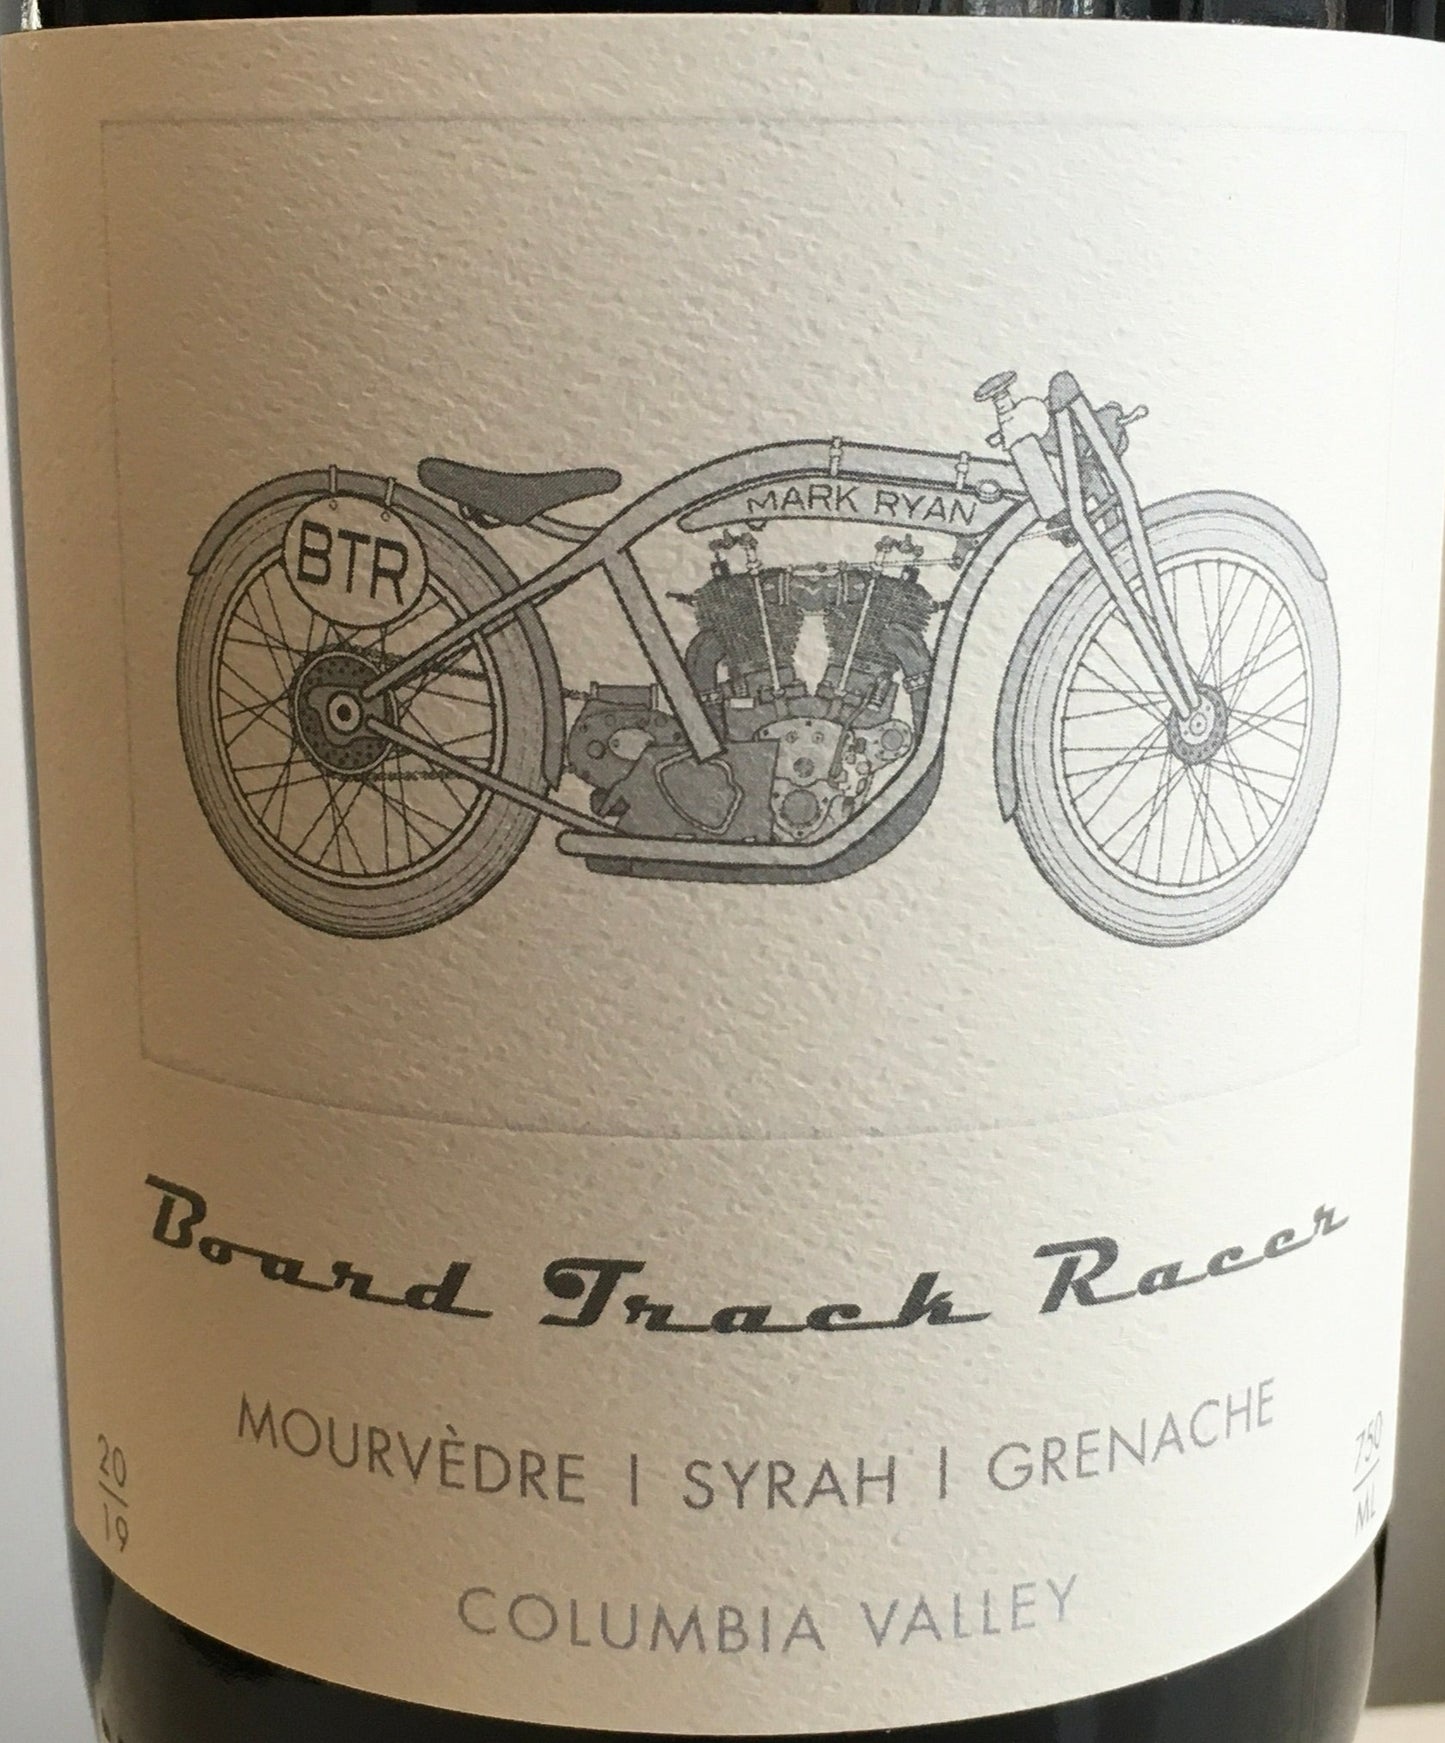 Board Track Racer 'The Shift' - Red Blend